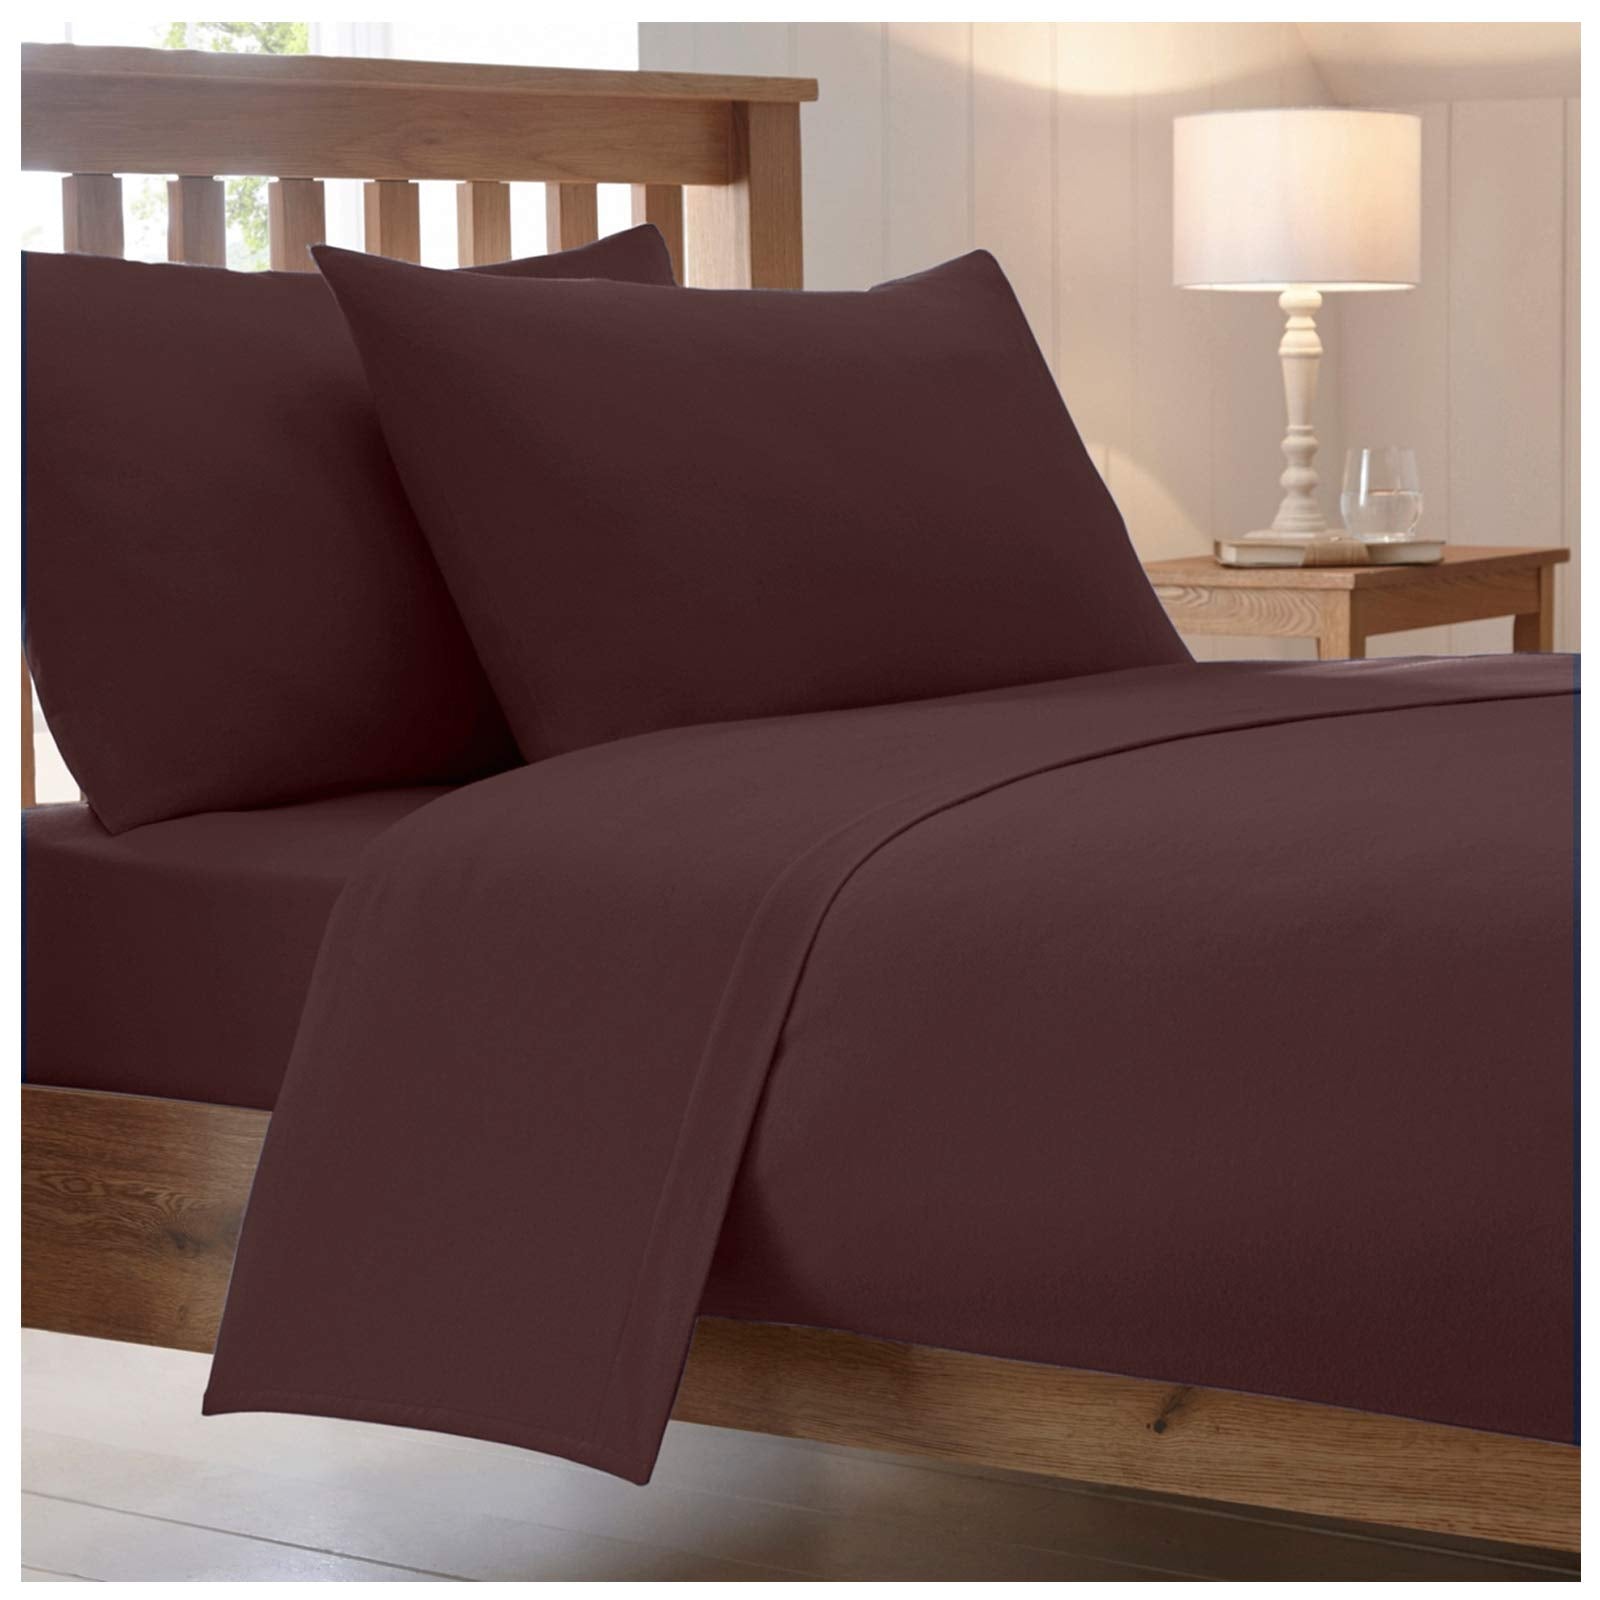 Catherine Lansfield, Combed Percale Non-Iron Sheeting, Chocolate, 3 sizes